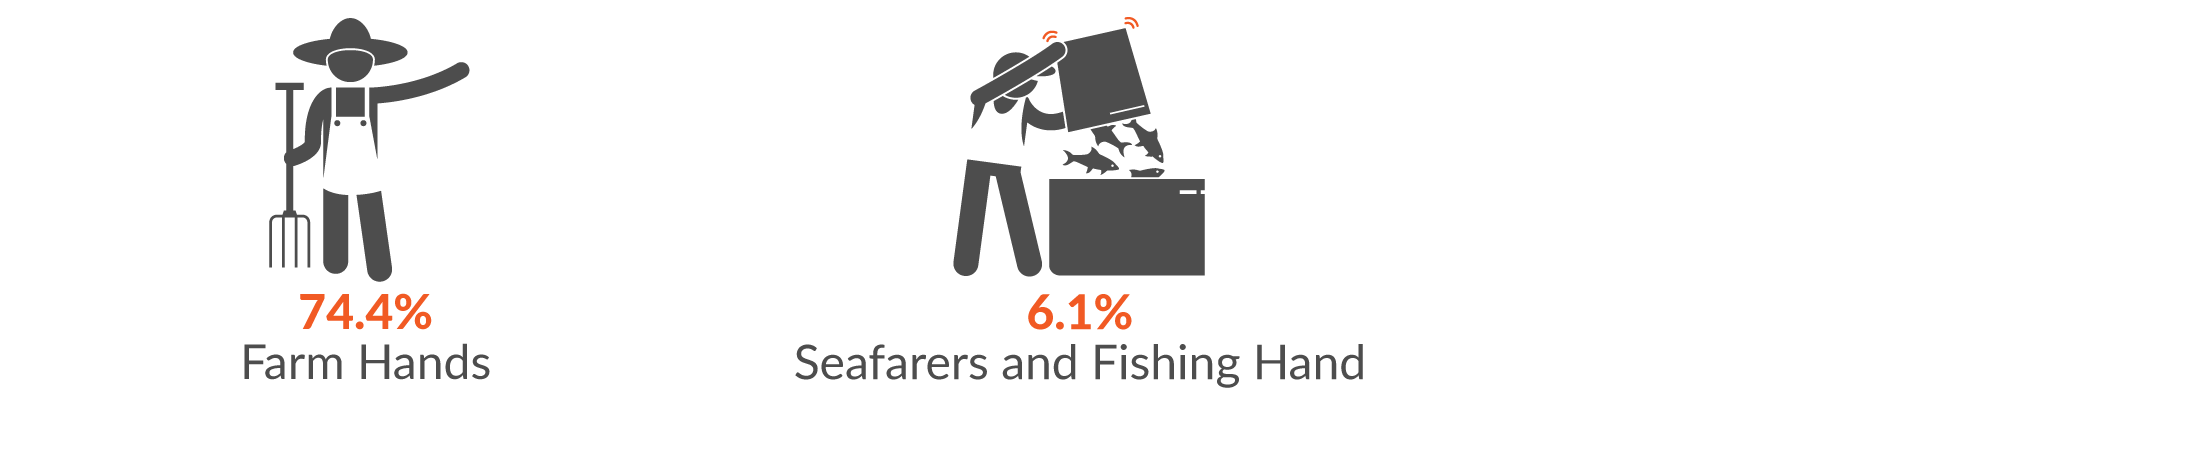 This infographic shows the main occupations by serious injury claims. 74.4% of Agriculture, forestry and fishing serious injury claims were made by a Farm Hand; and 6.1% by Seafarers and Fishing Hands.